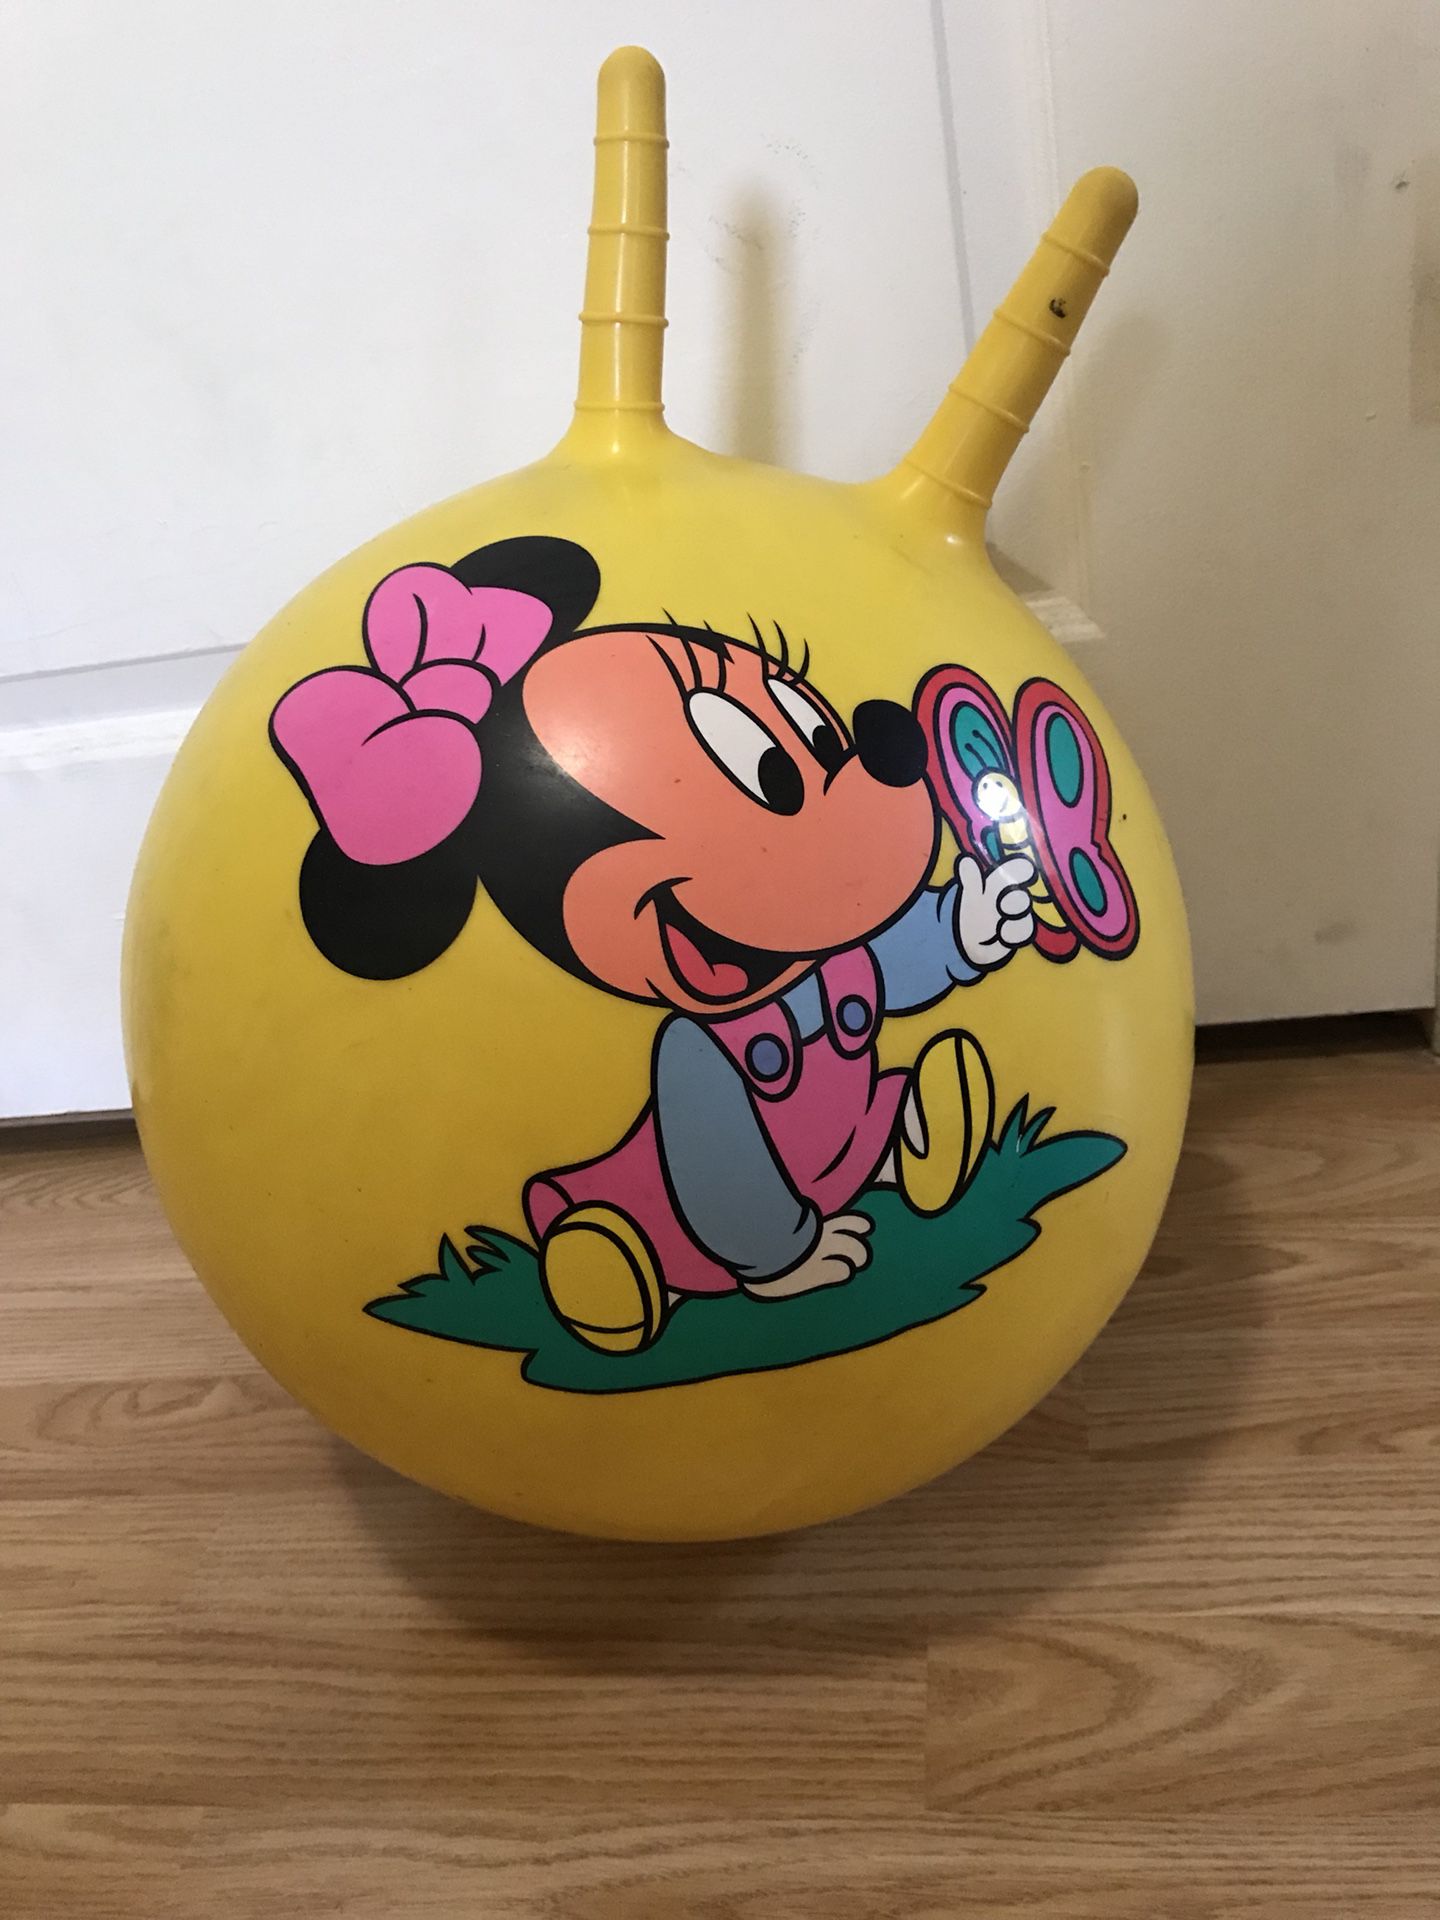 Disney Minnie Mouse Mug Warmer for Sale in Champions Gt, FL - OfferUp